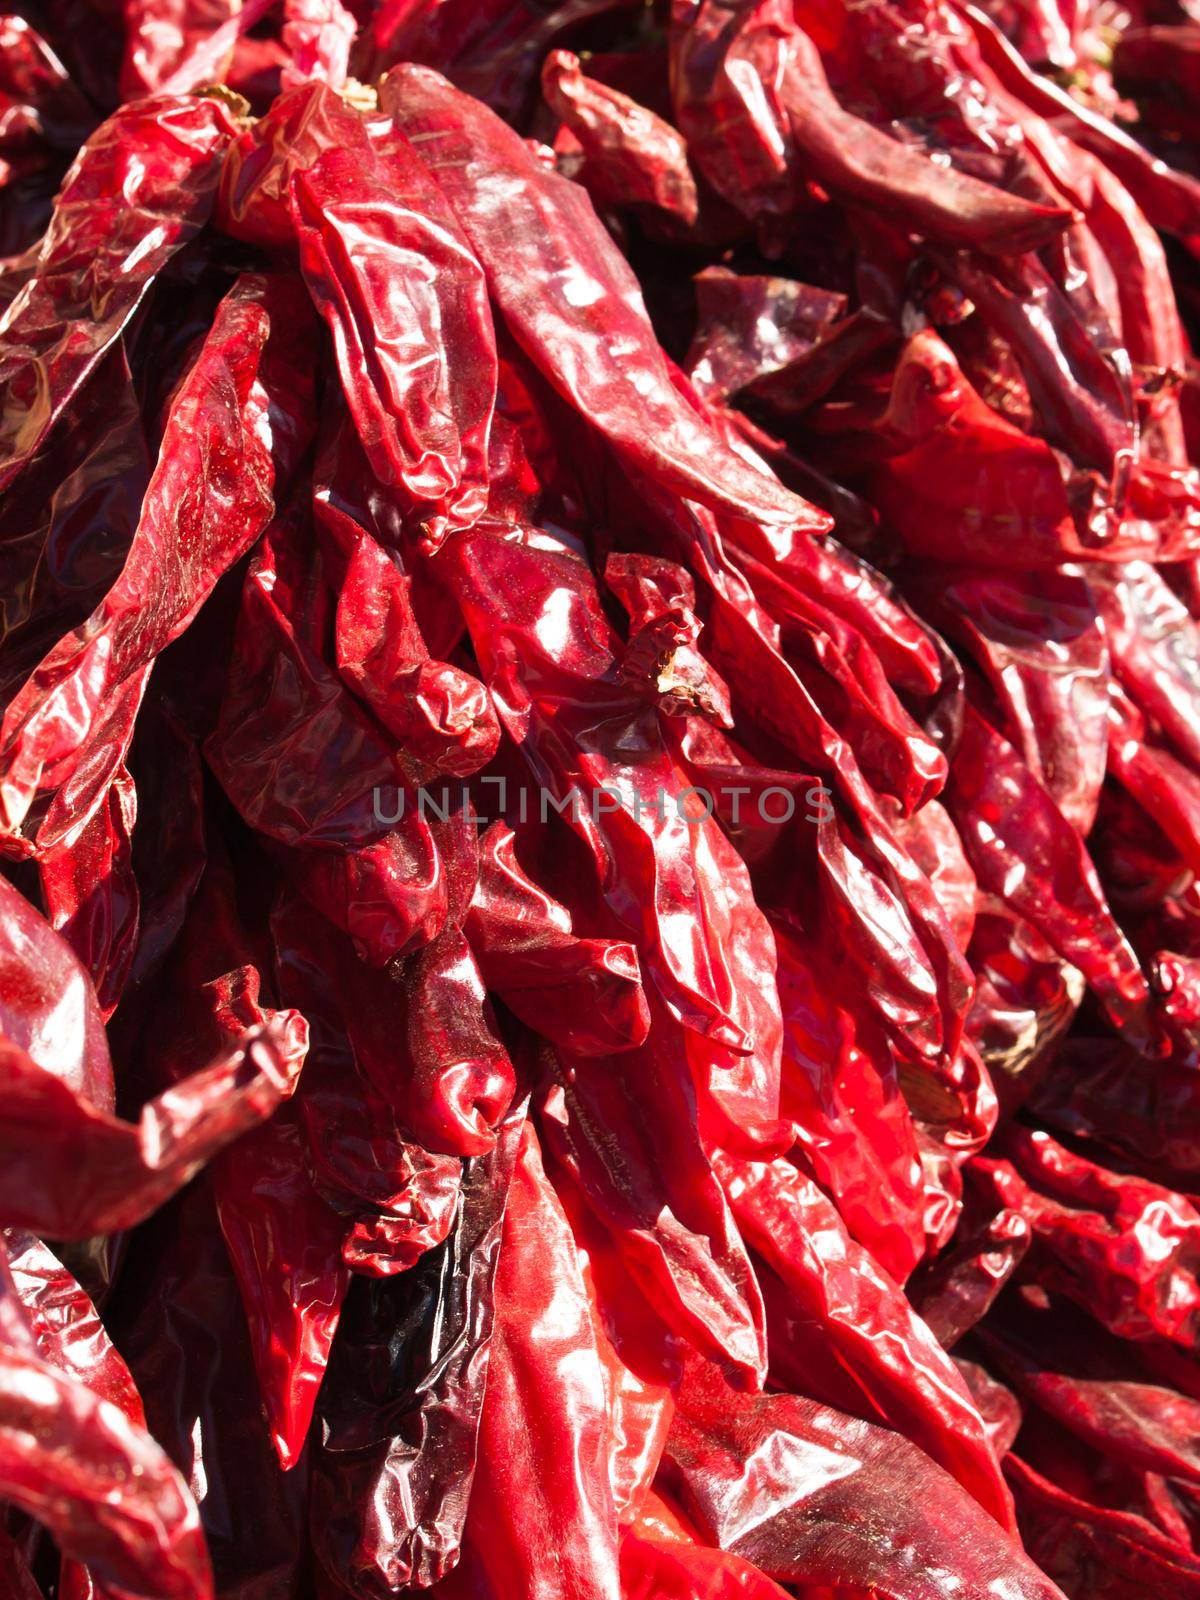 Dried red hot chili peppers. A staple of many Mexican dishes.